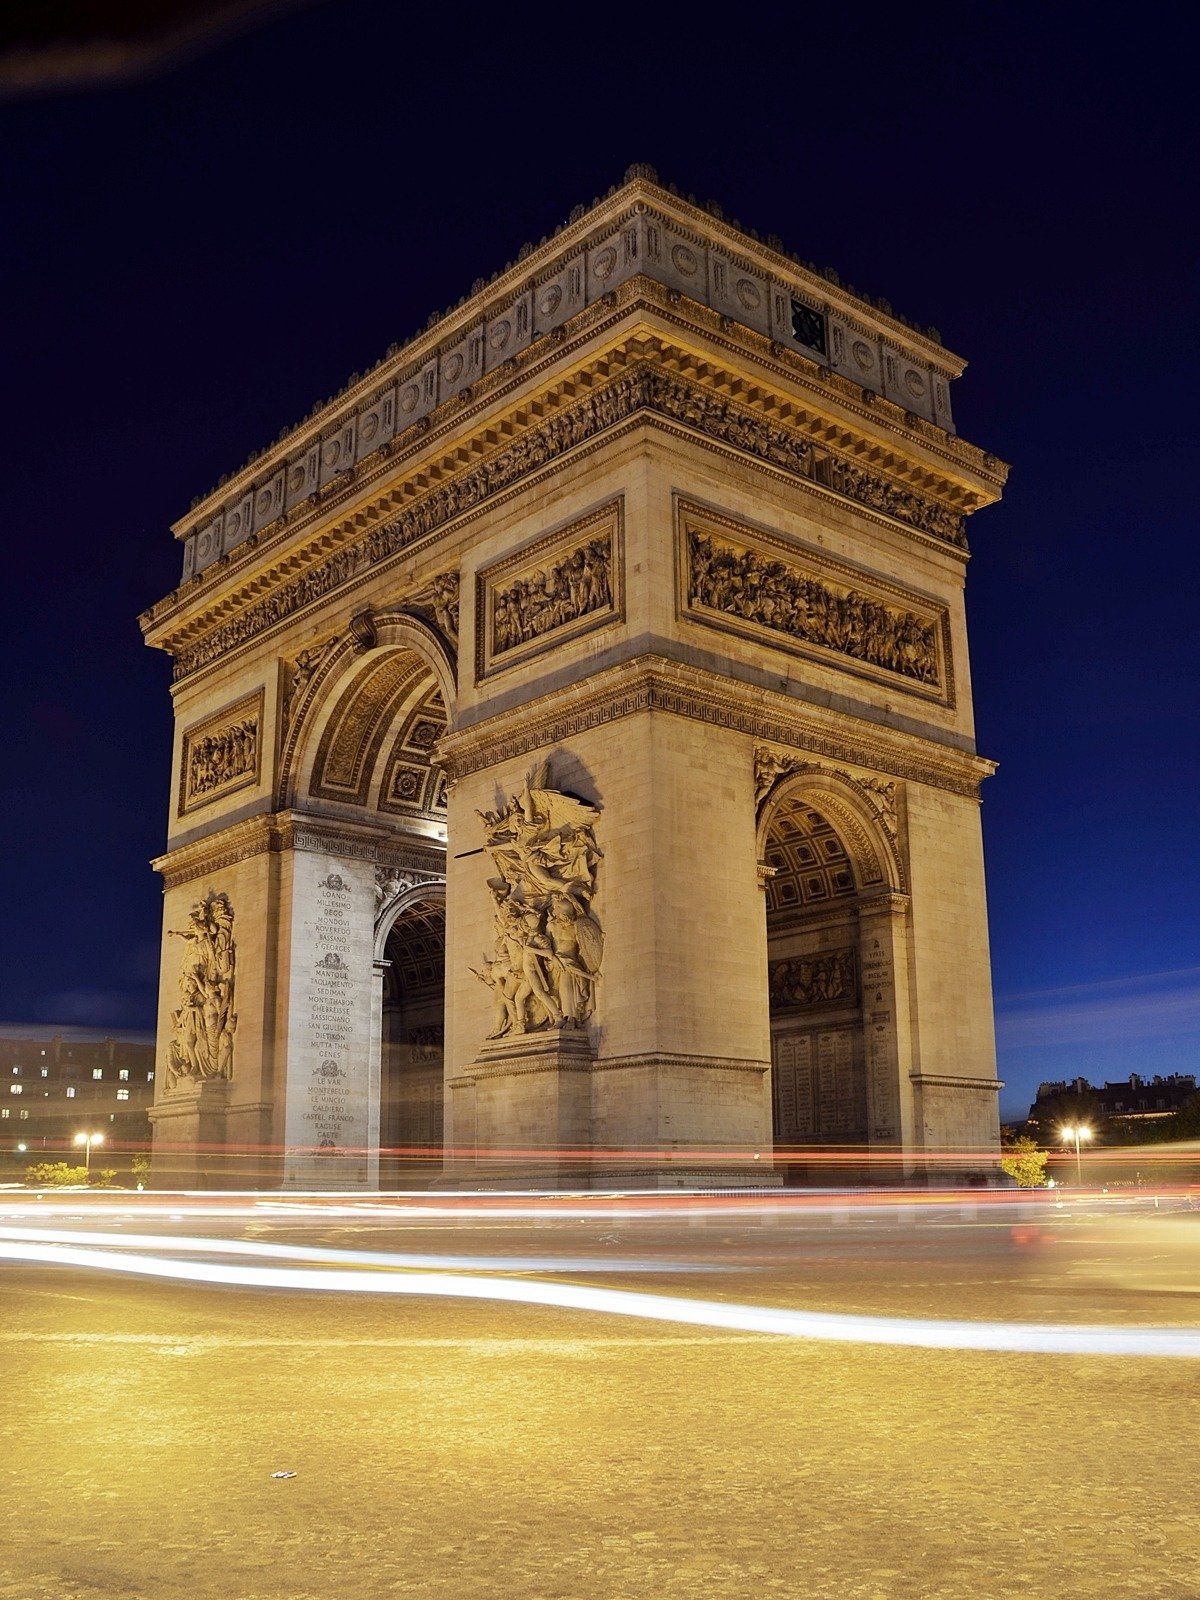 The triumphal arch in paris is lit up at night